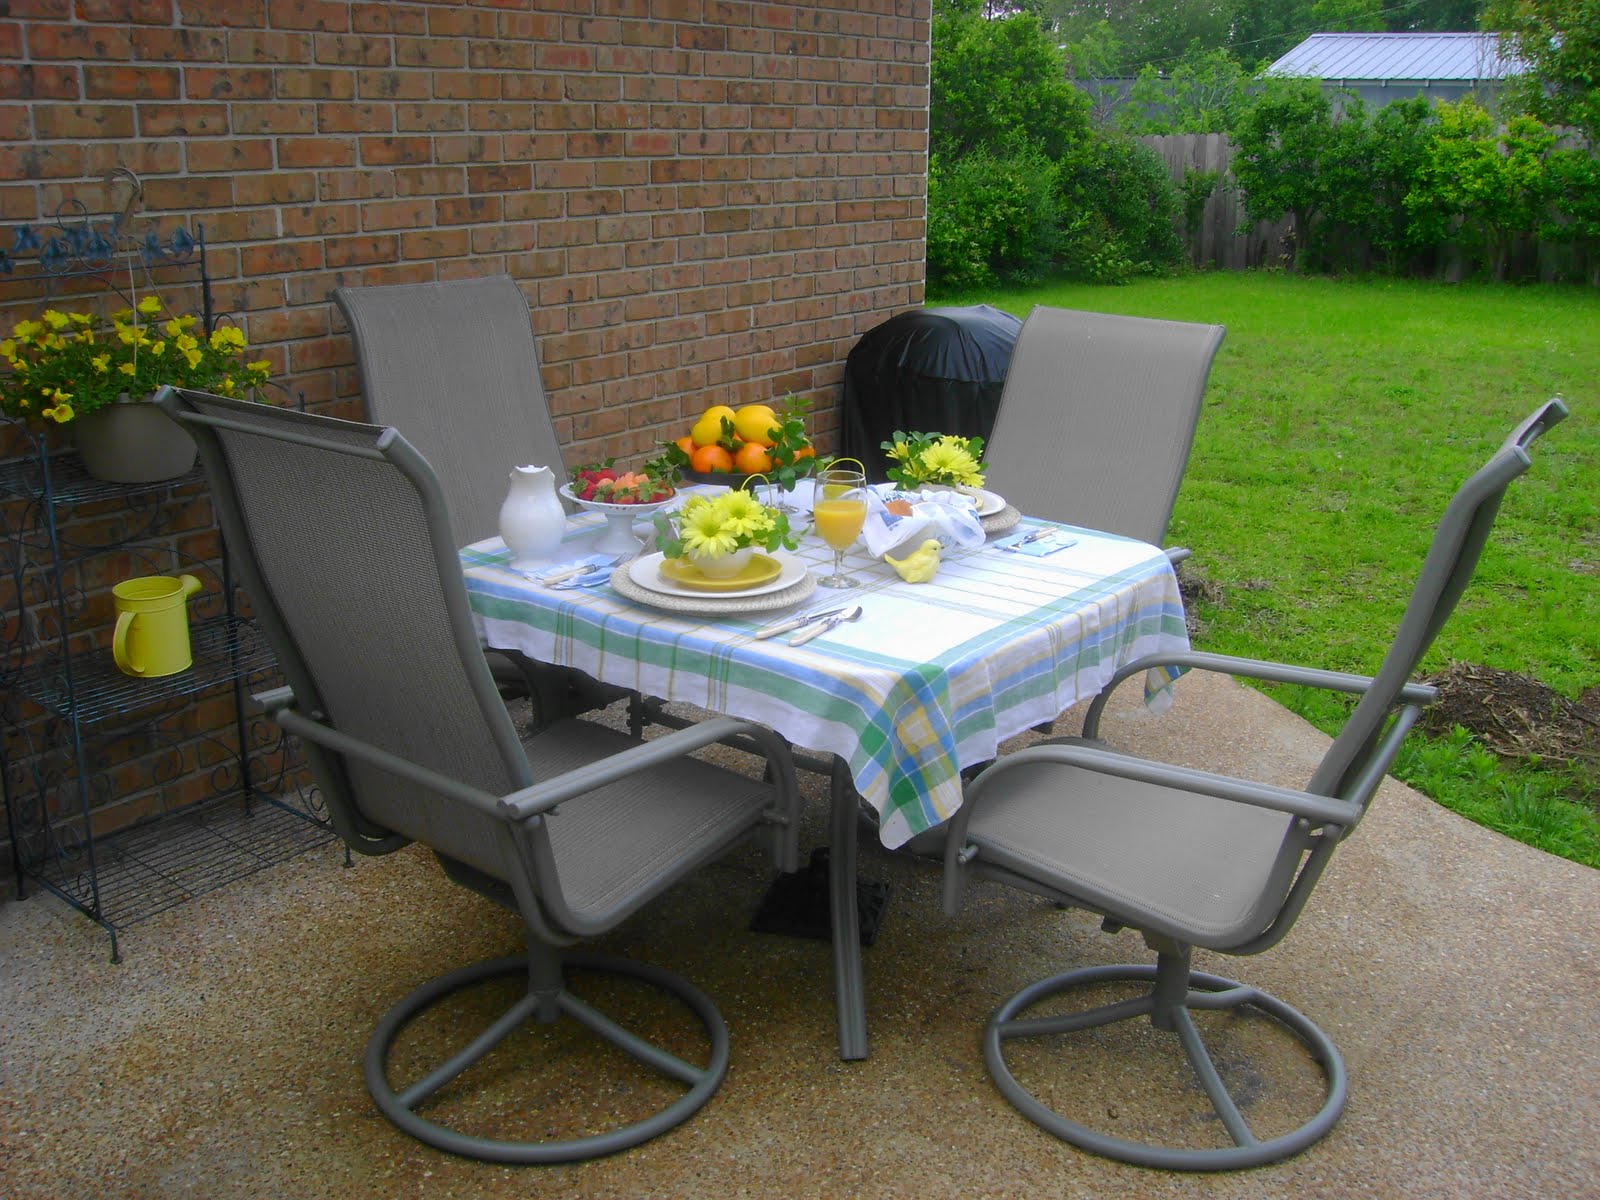 The Sunny Side of the Sun Porch: Breakfast on the Patio